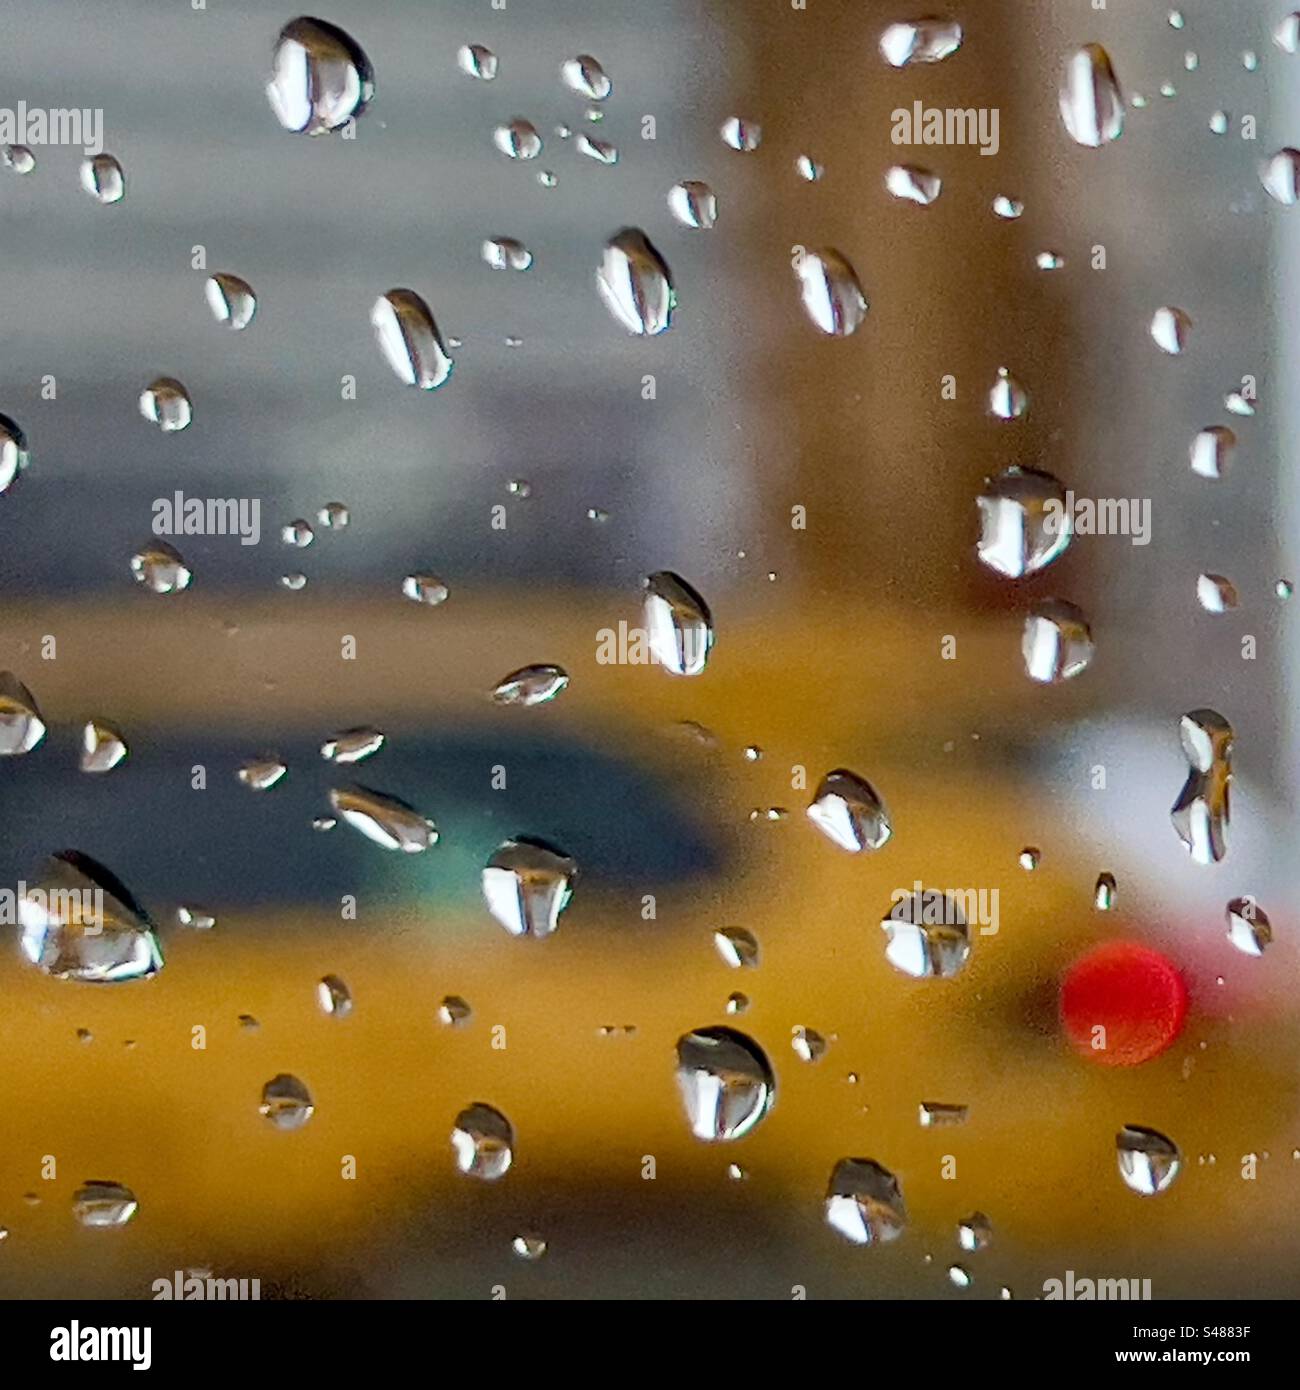 Impression of yellow New York City taxi seen through a rain spattered window Stock Photo